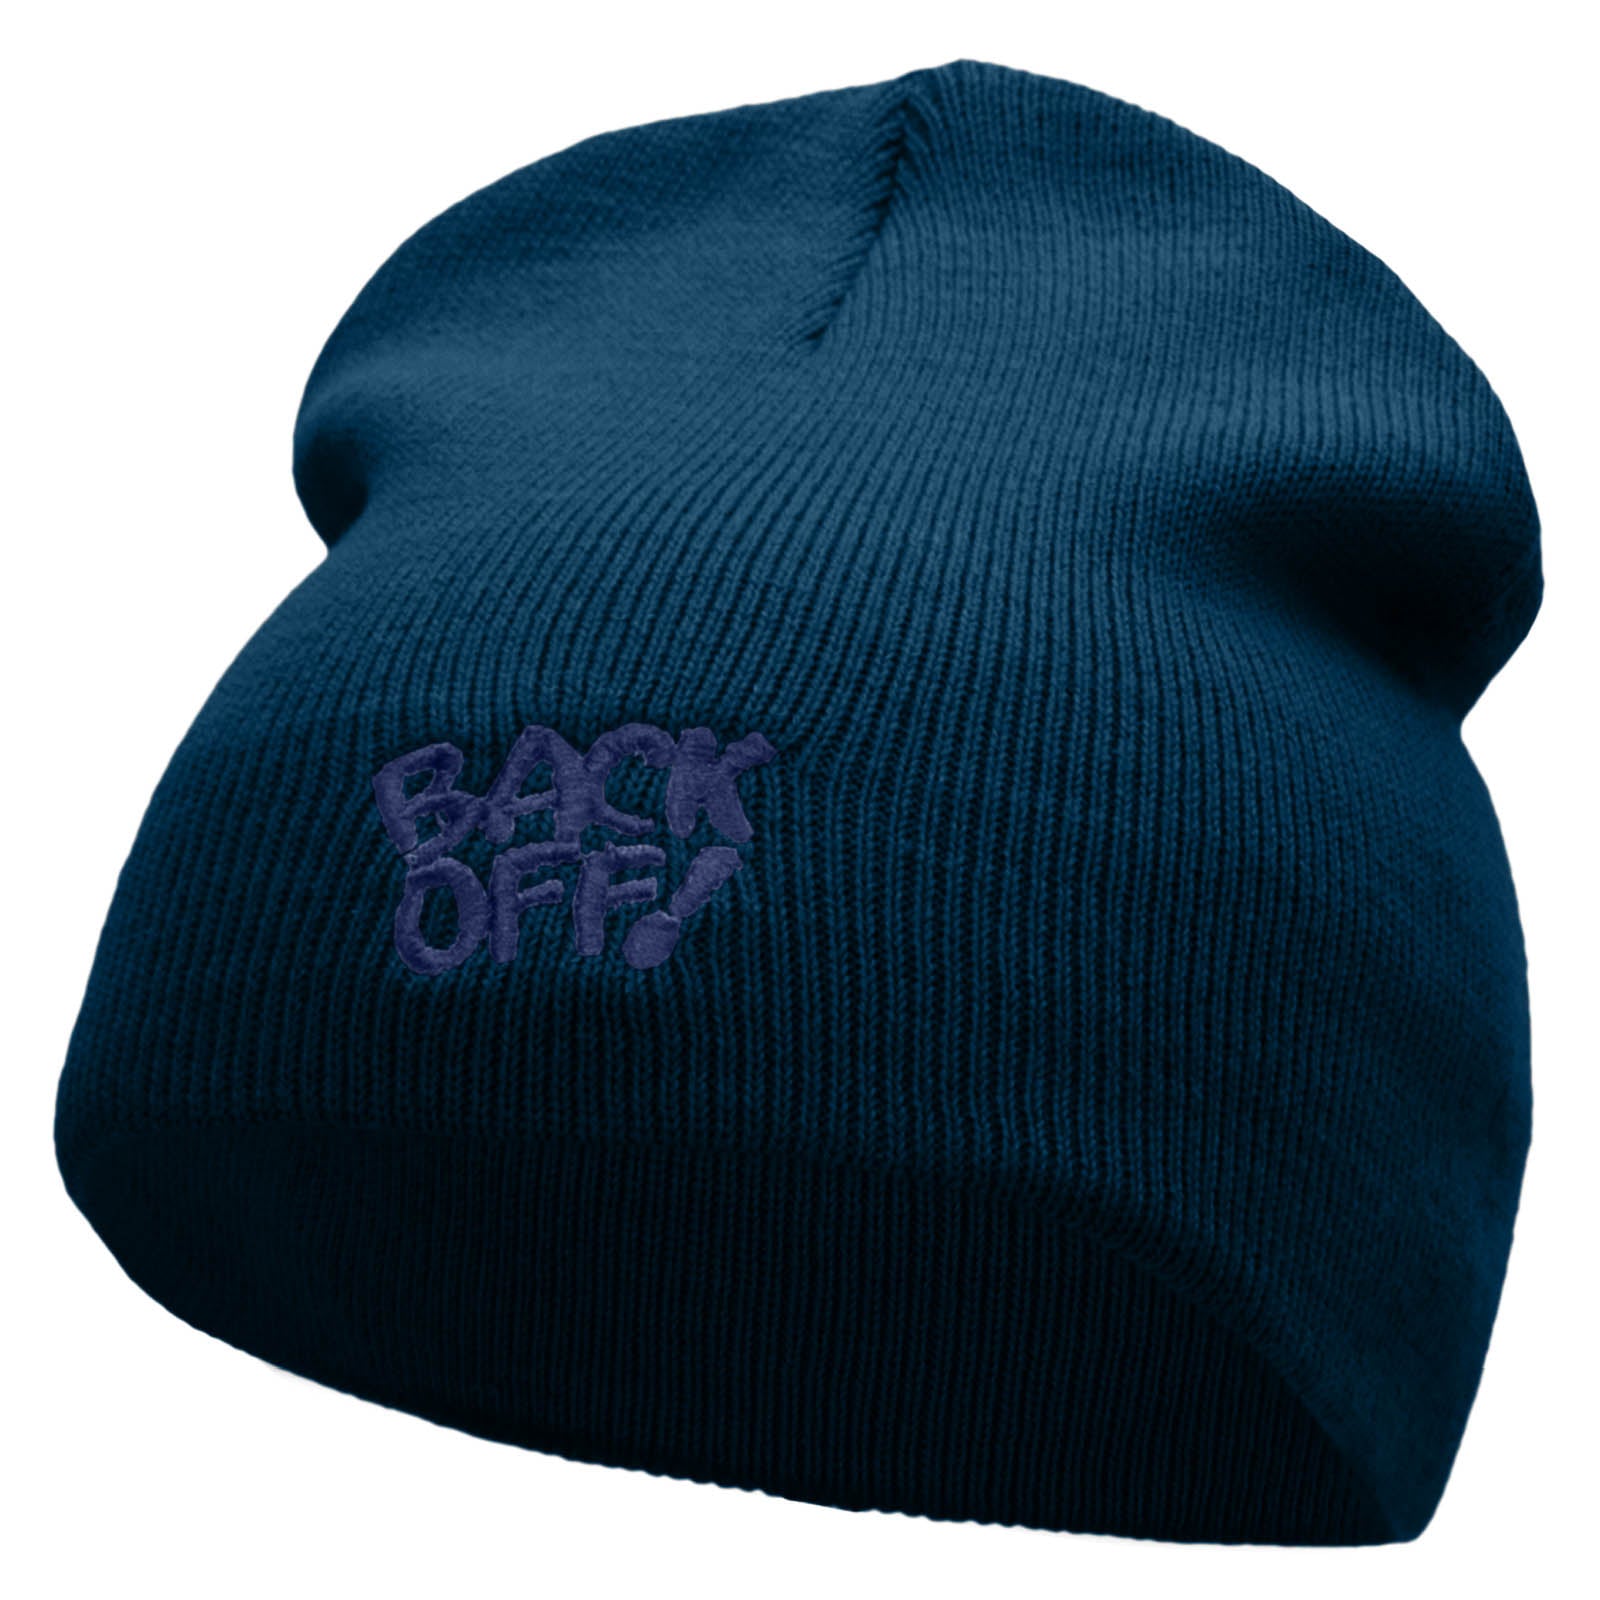 Back Off Saying Embroidered Short Beanie - Navy OSFM